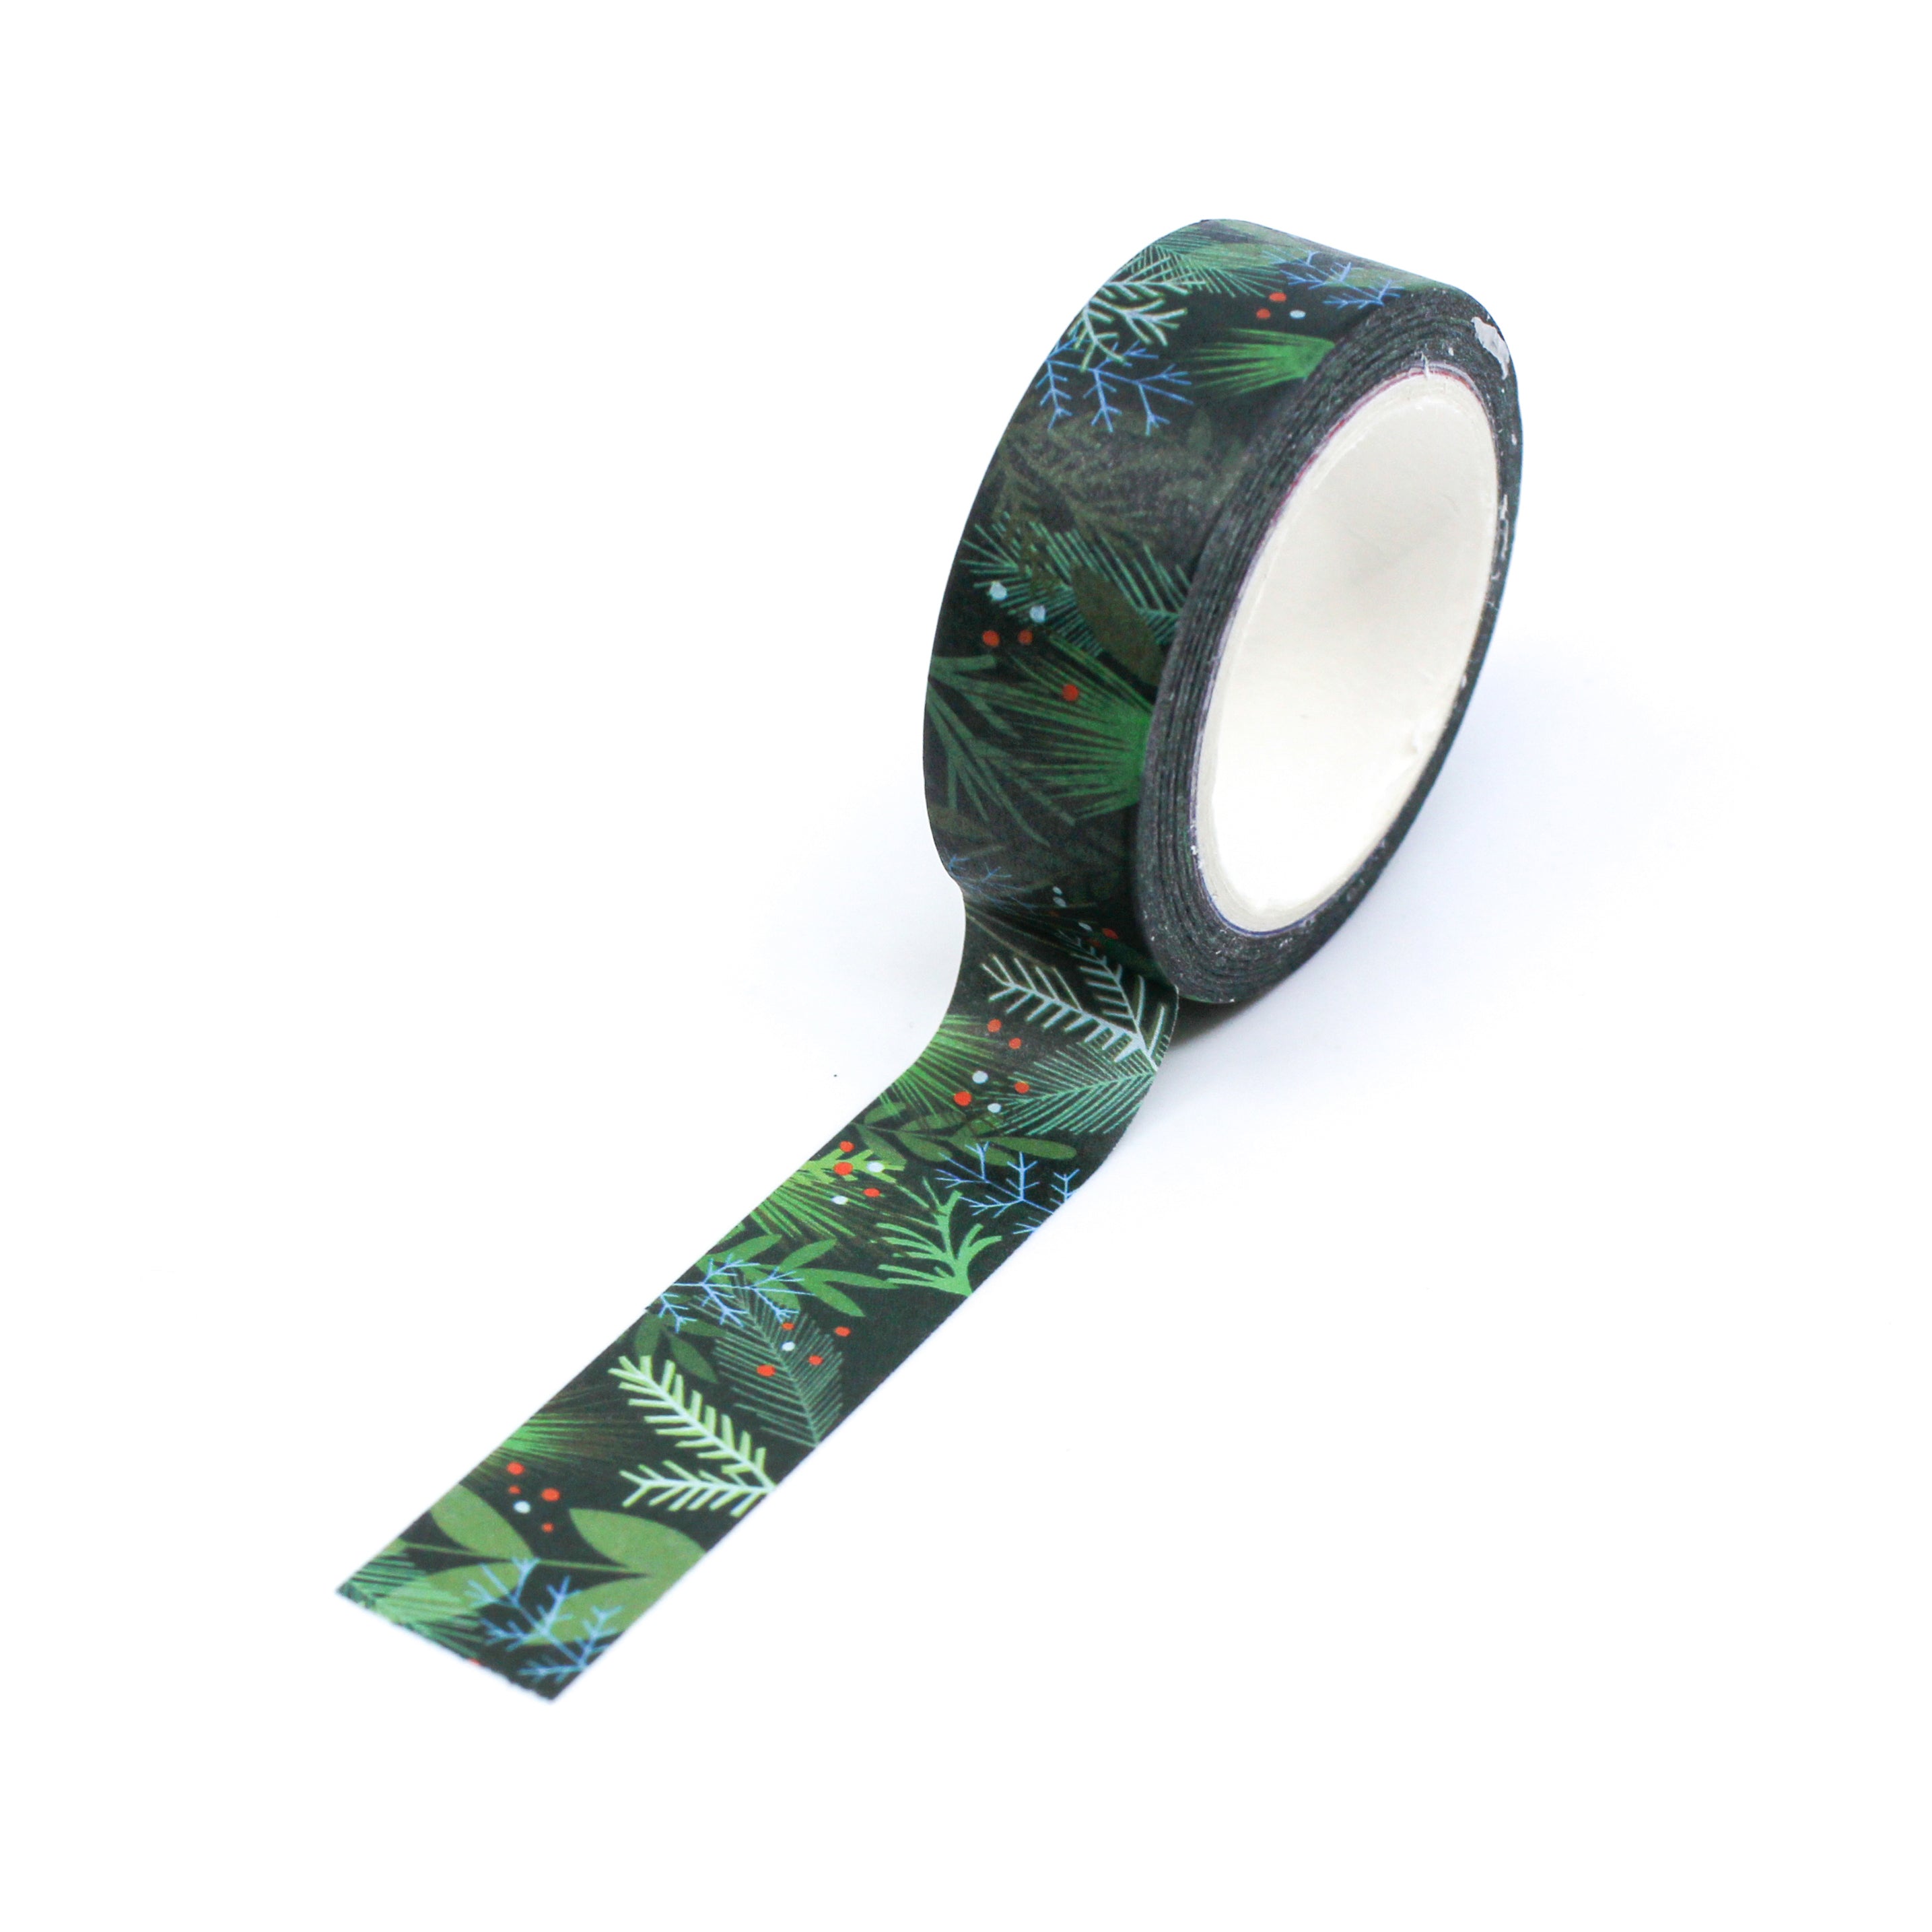 This is a full view pattern of green foil washi Holiday garland washi tape from BBB Supplies Craft Shop